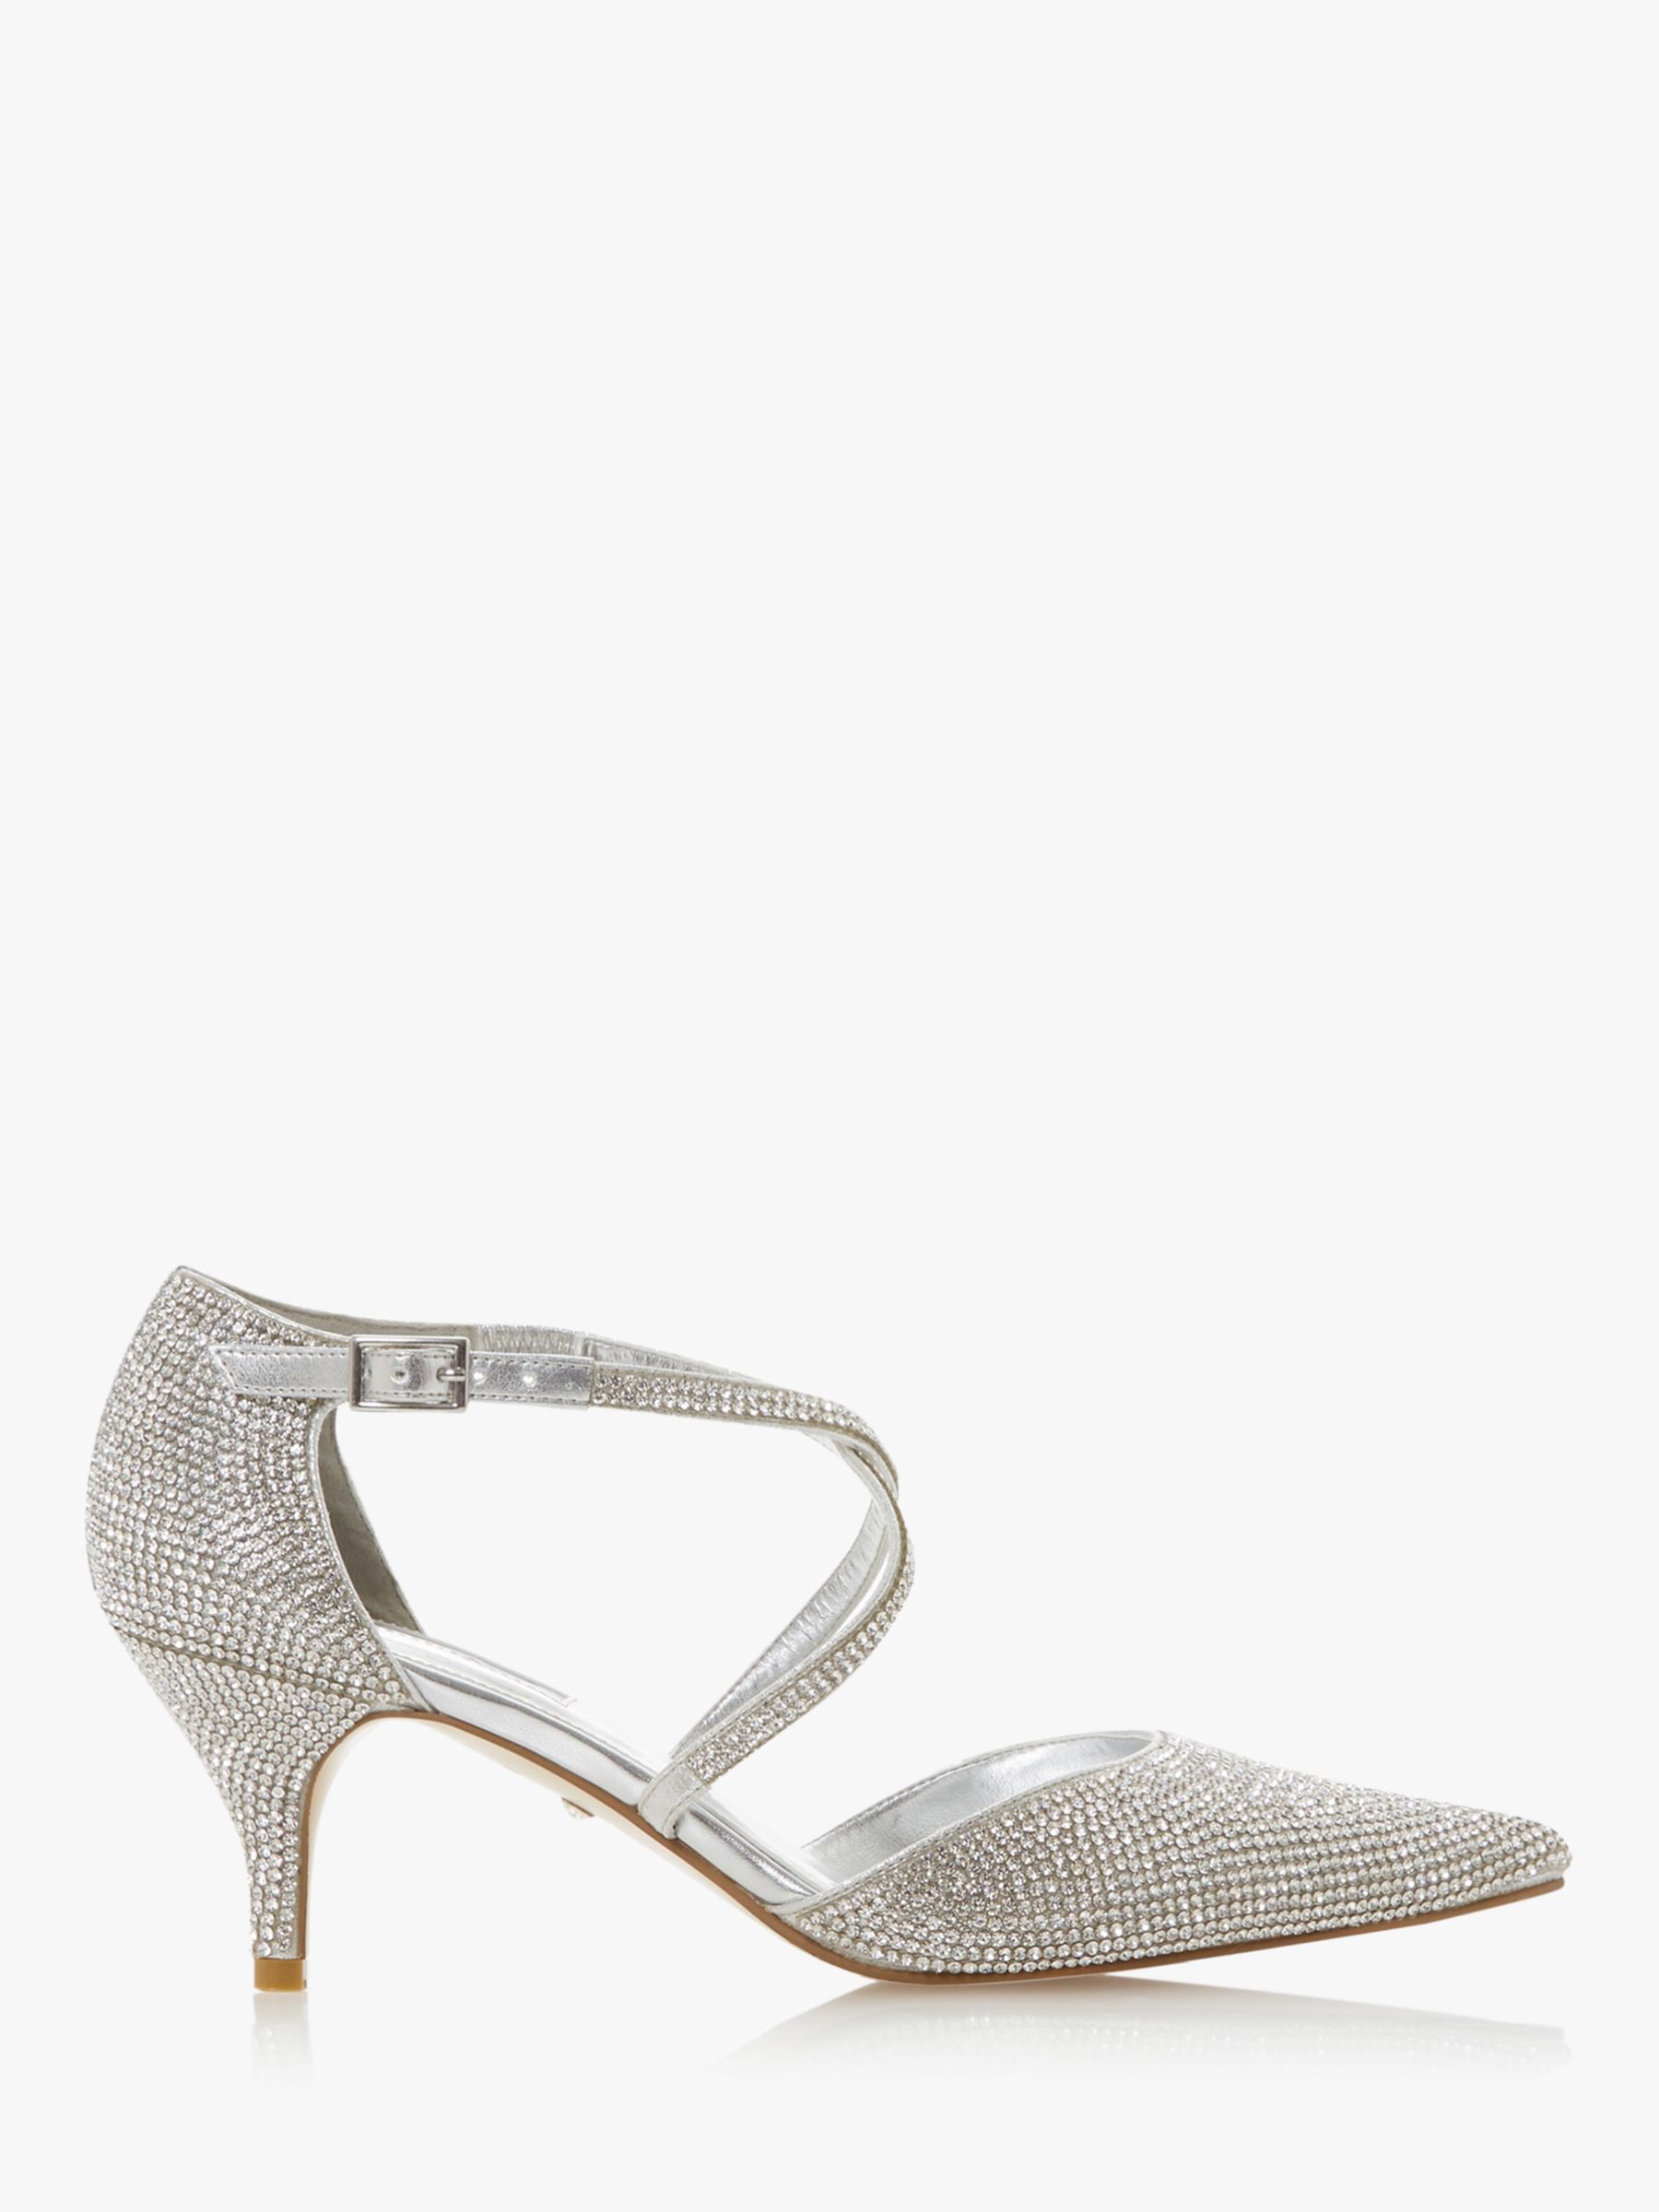 Dune Captivated Embellished Pointed Toe Court Shoes, Silver at John ...